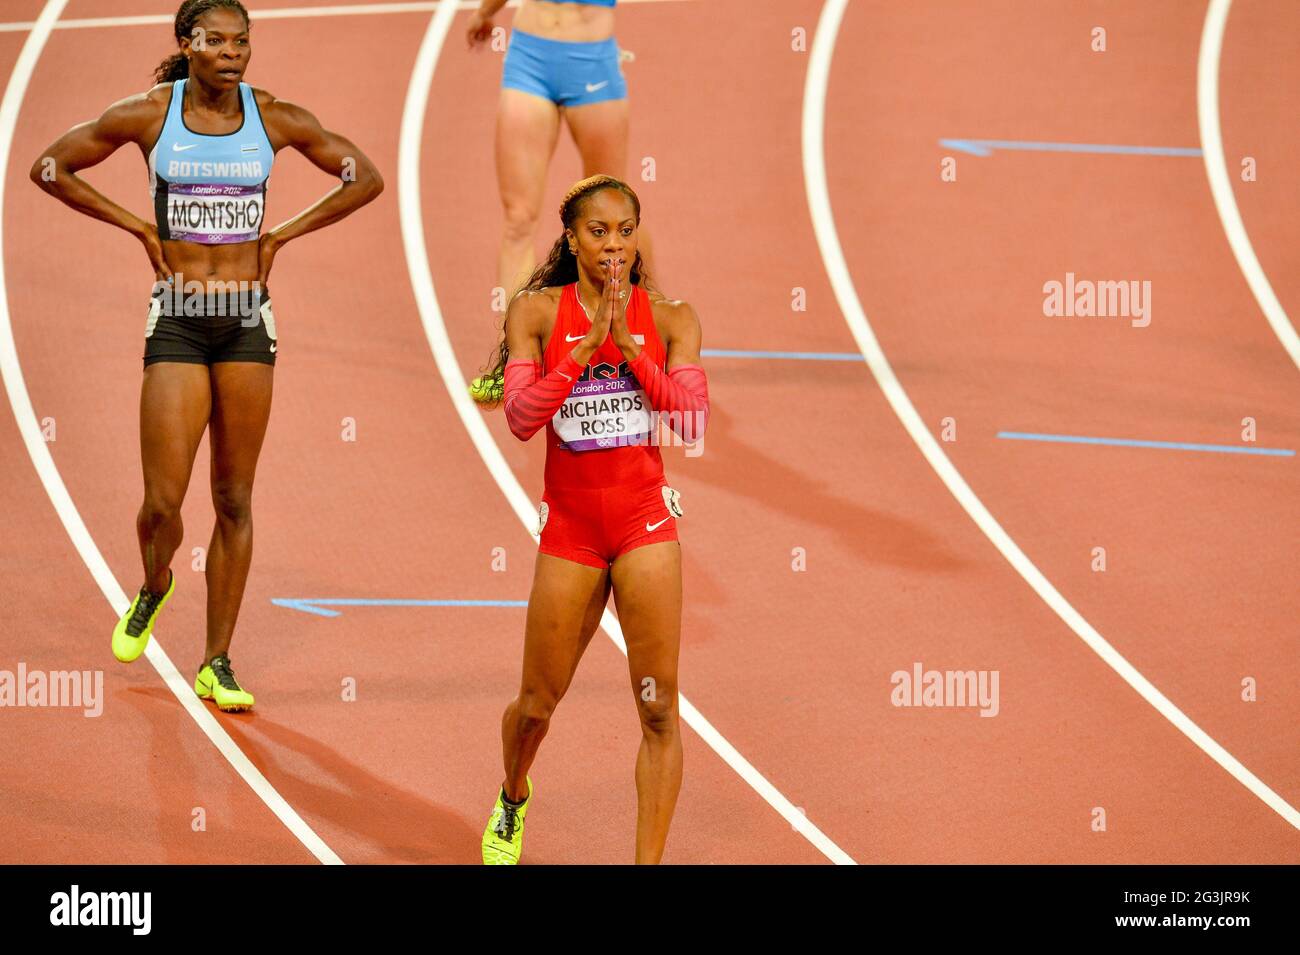 LONDON, ENGLAND - AUGUST 5, Sanya Richards-Ross of the United States after the women’s 400m during the evening session of athletics at the Olympic Stadium  on August 5, 2012 in London, England Photo by Roger Sedres / Gallo Images Stock Photo